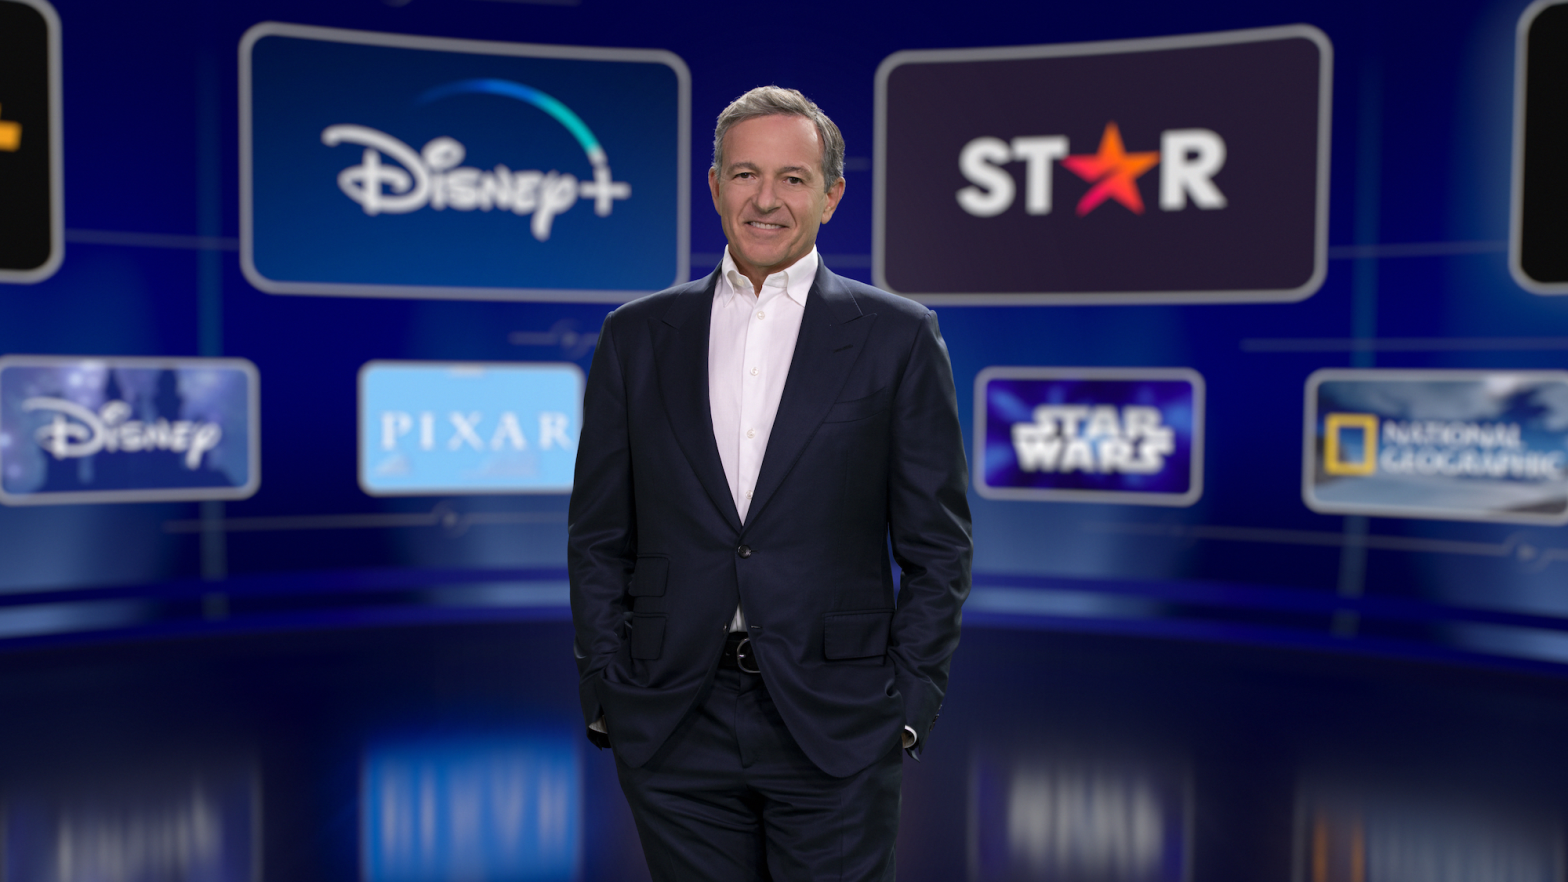 Bob Iger, former Disney head, would like to remind you your Disney+ subscription is worth it. (Photo: Disney)